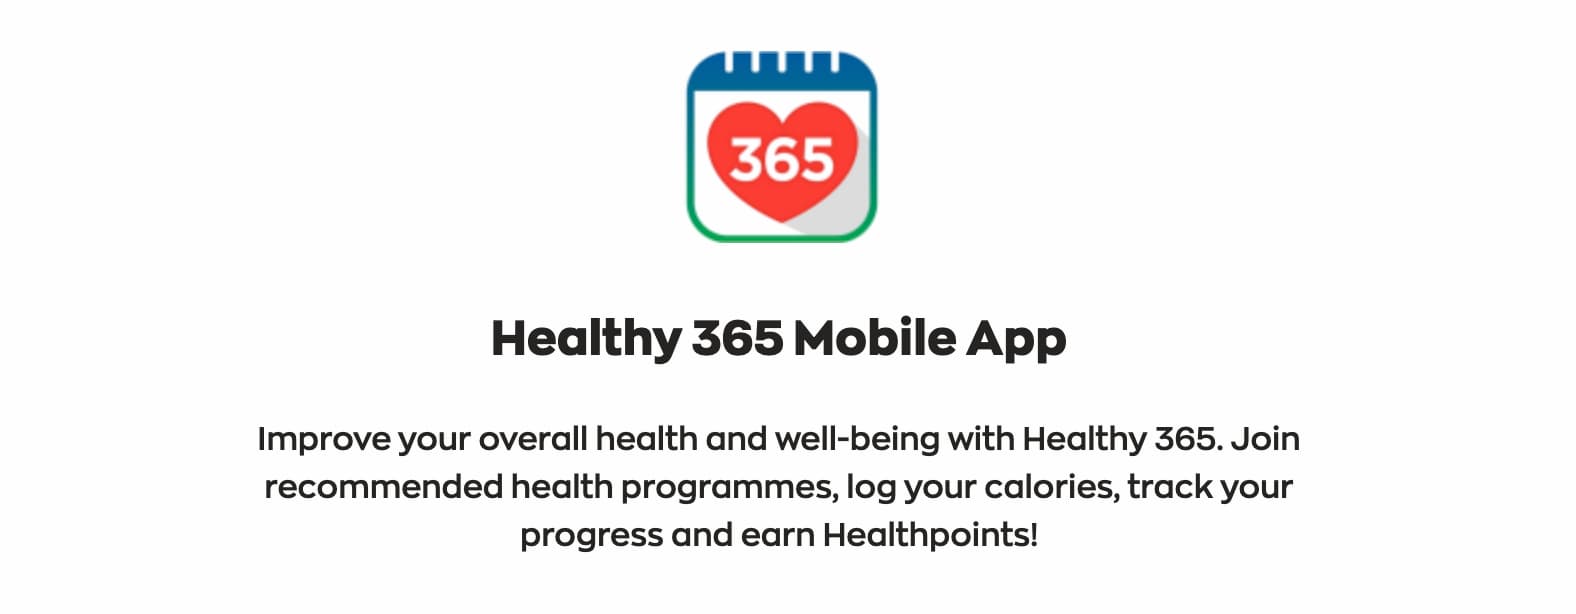 Healthy 365 mobile app to improve overall health and well-being via points system